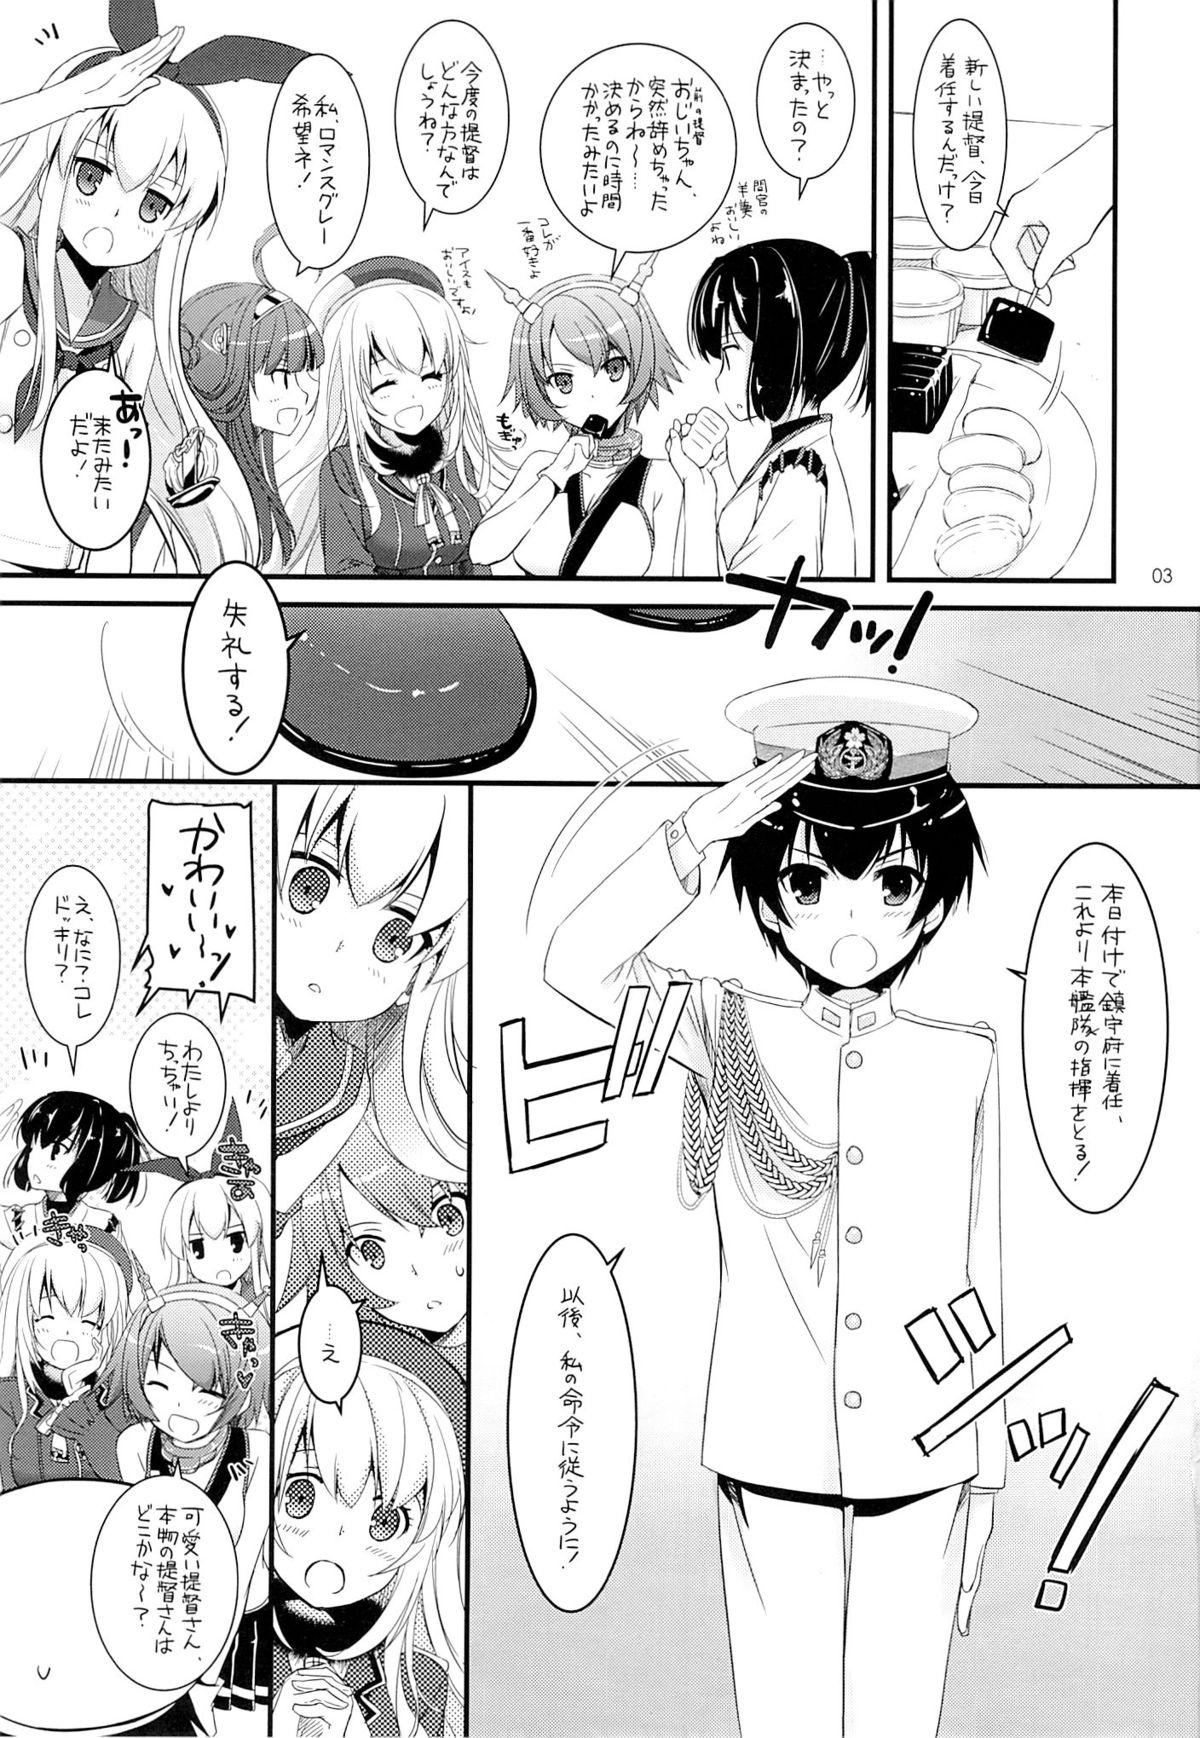 Mexicano D.L. action 81 - Kantai collection Suckingcock - Page 2